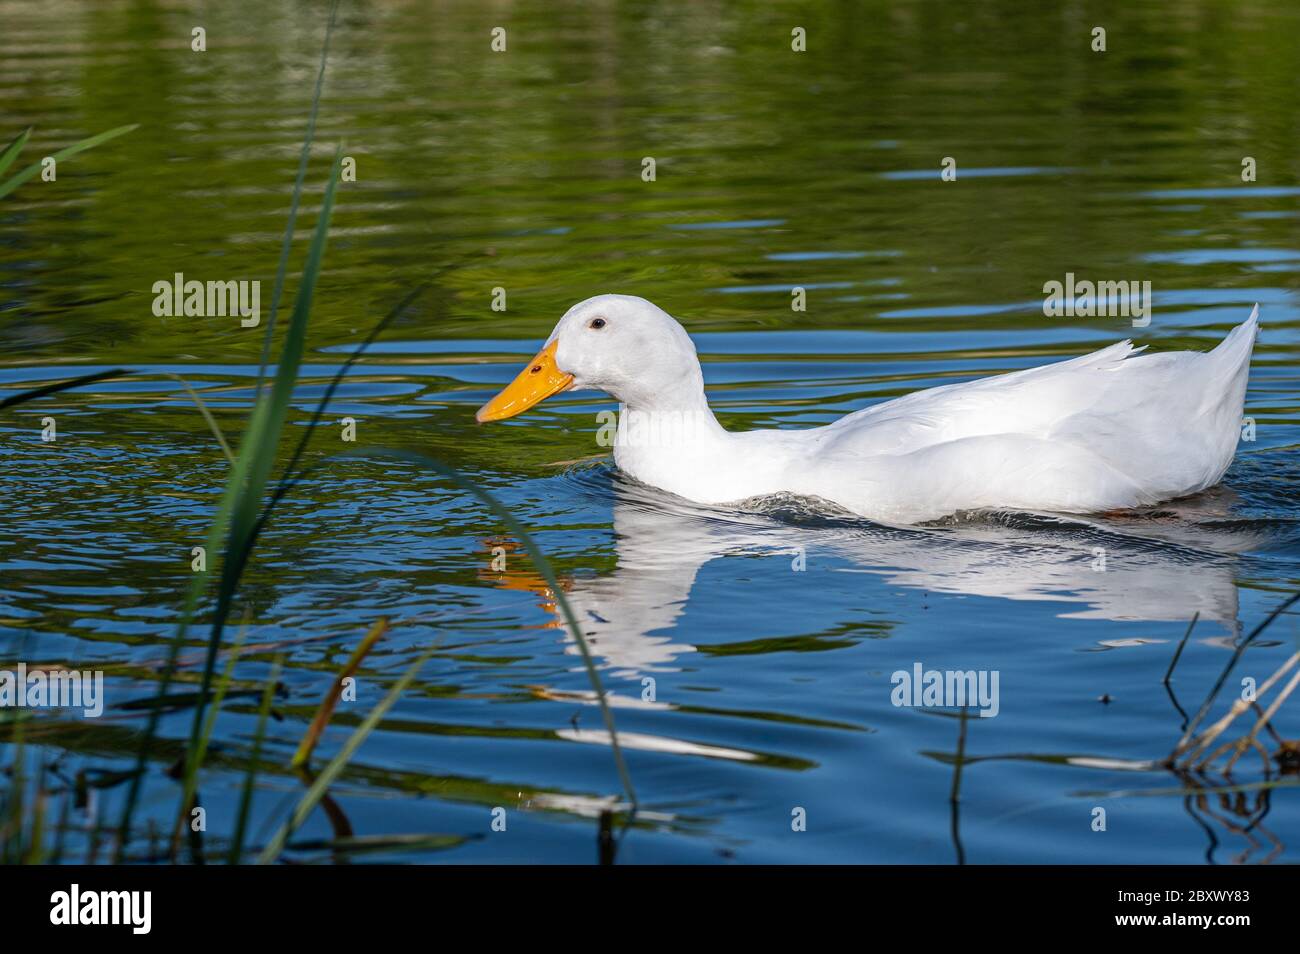 Male pekin duck, also known as Aylesbury or Long Island Duck, swimming on a calm, still lake Stock Photo